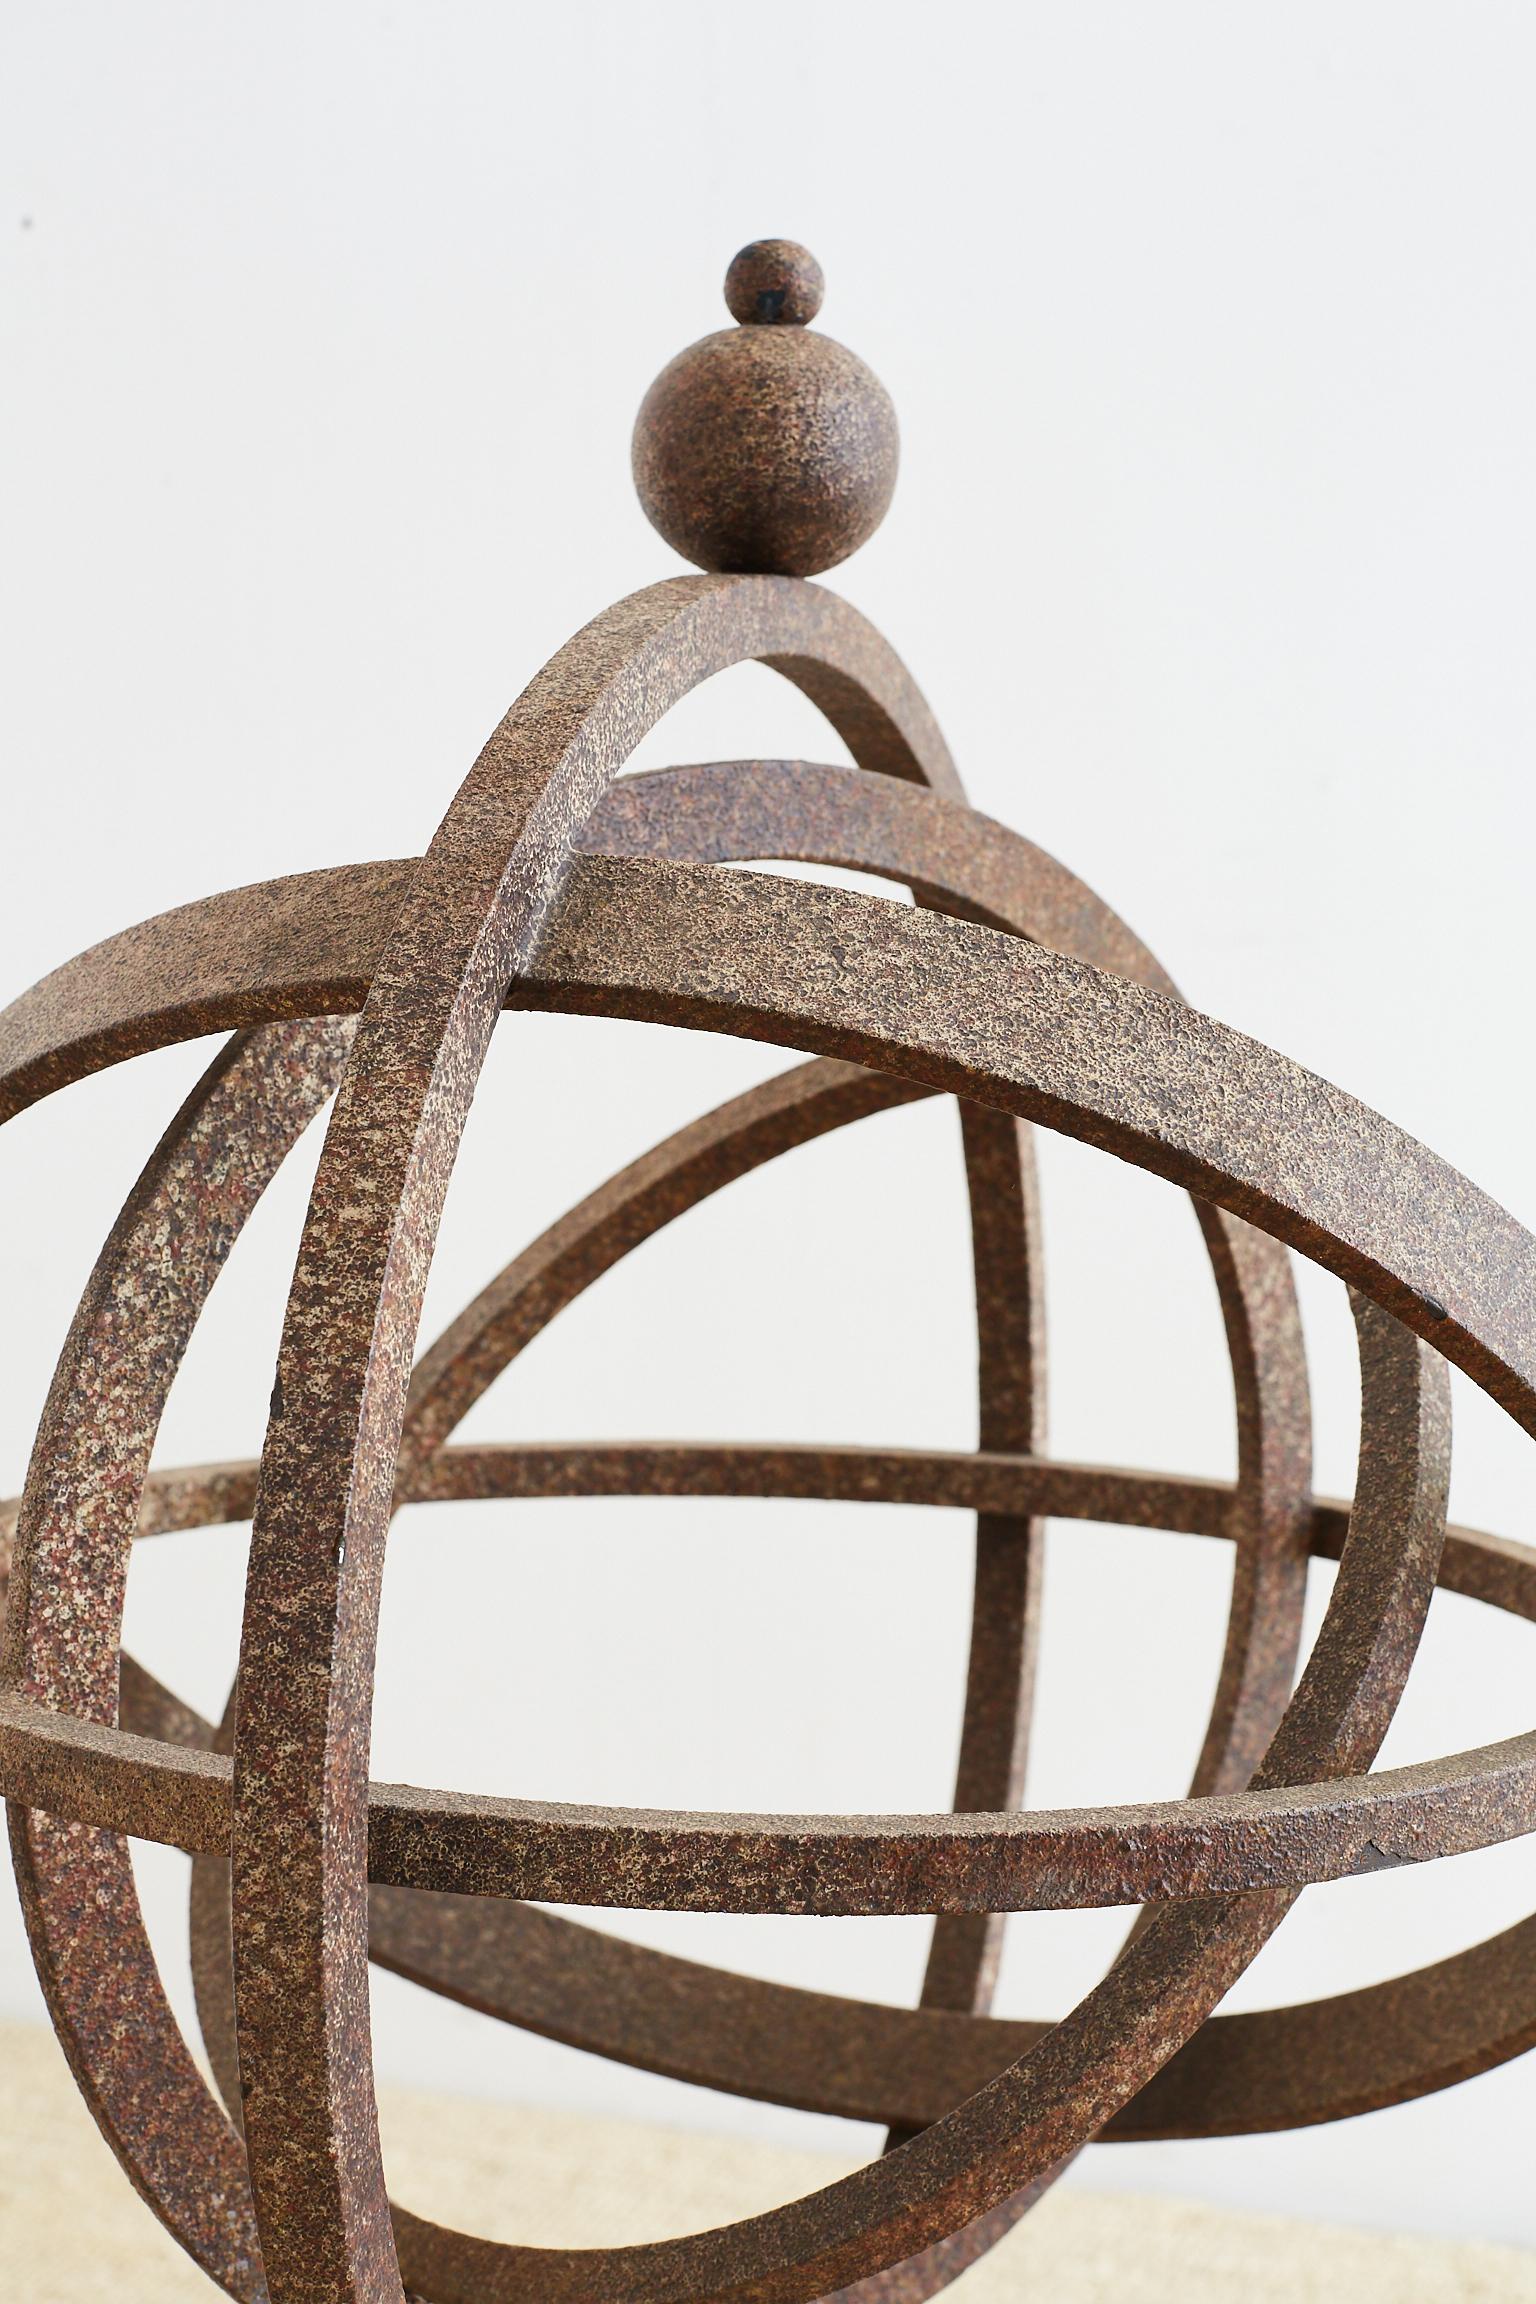 Decorative iron garden armillary sphere or garden globe on stand. Features a non-turning set of rings on a ring stand with round feet and topped with a round finial. The iron is coated with a distressed patinated finish. Heavy and solid measuring 42